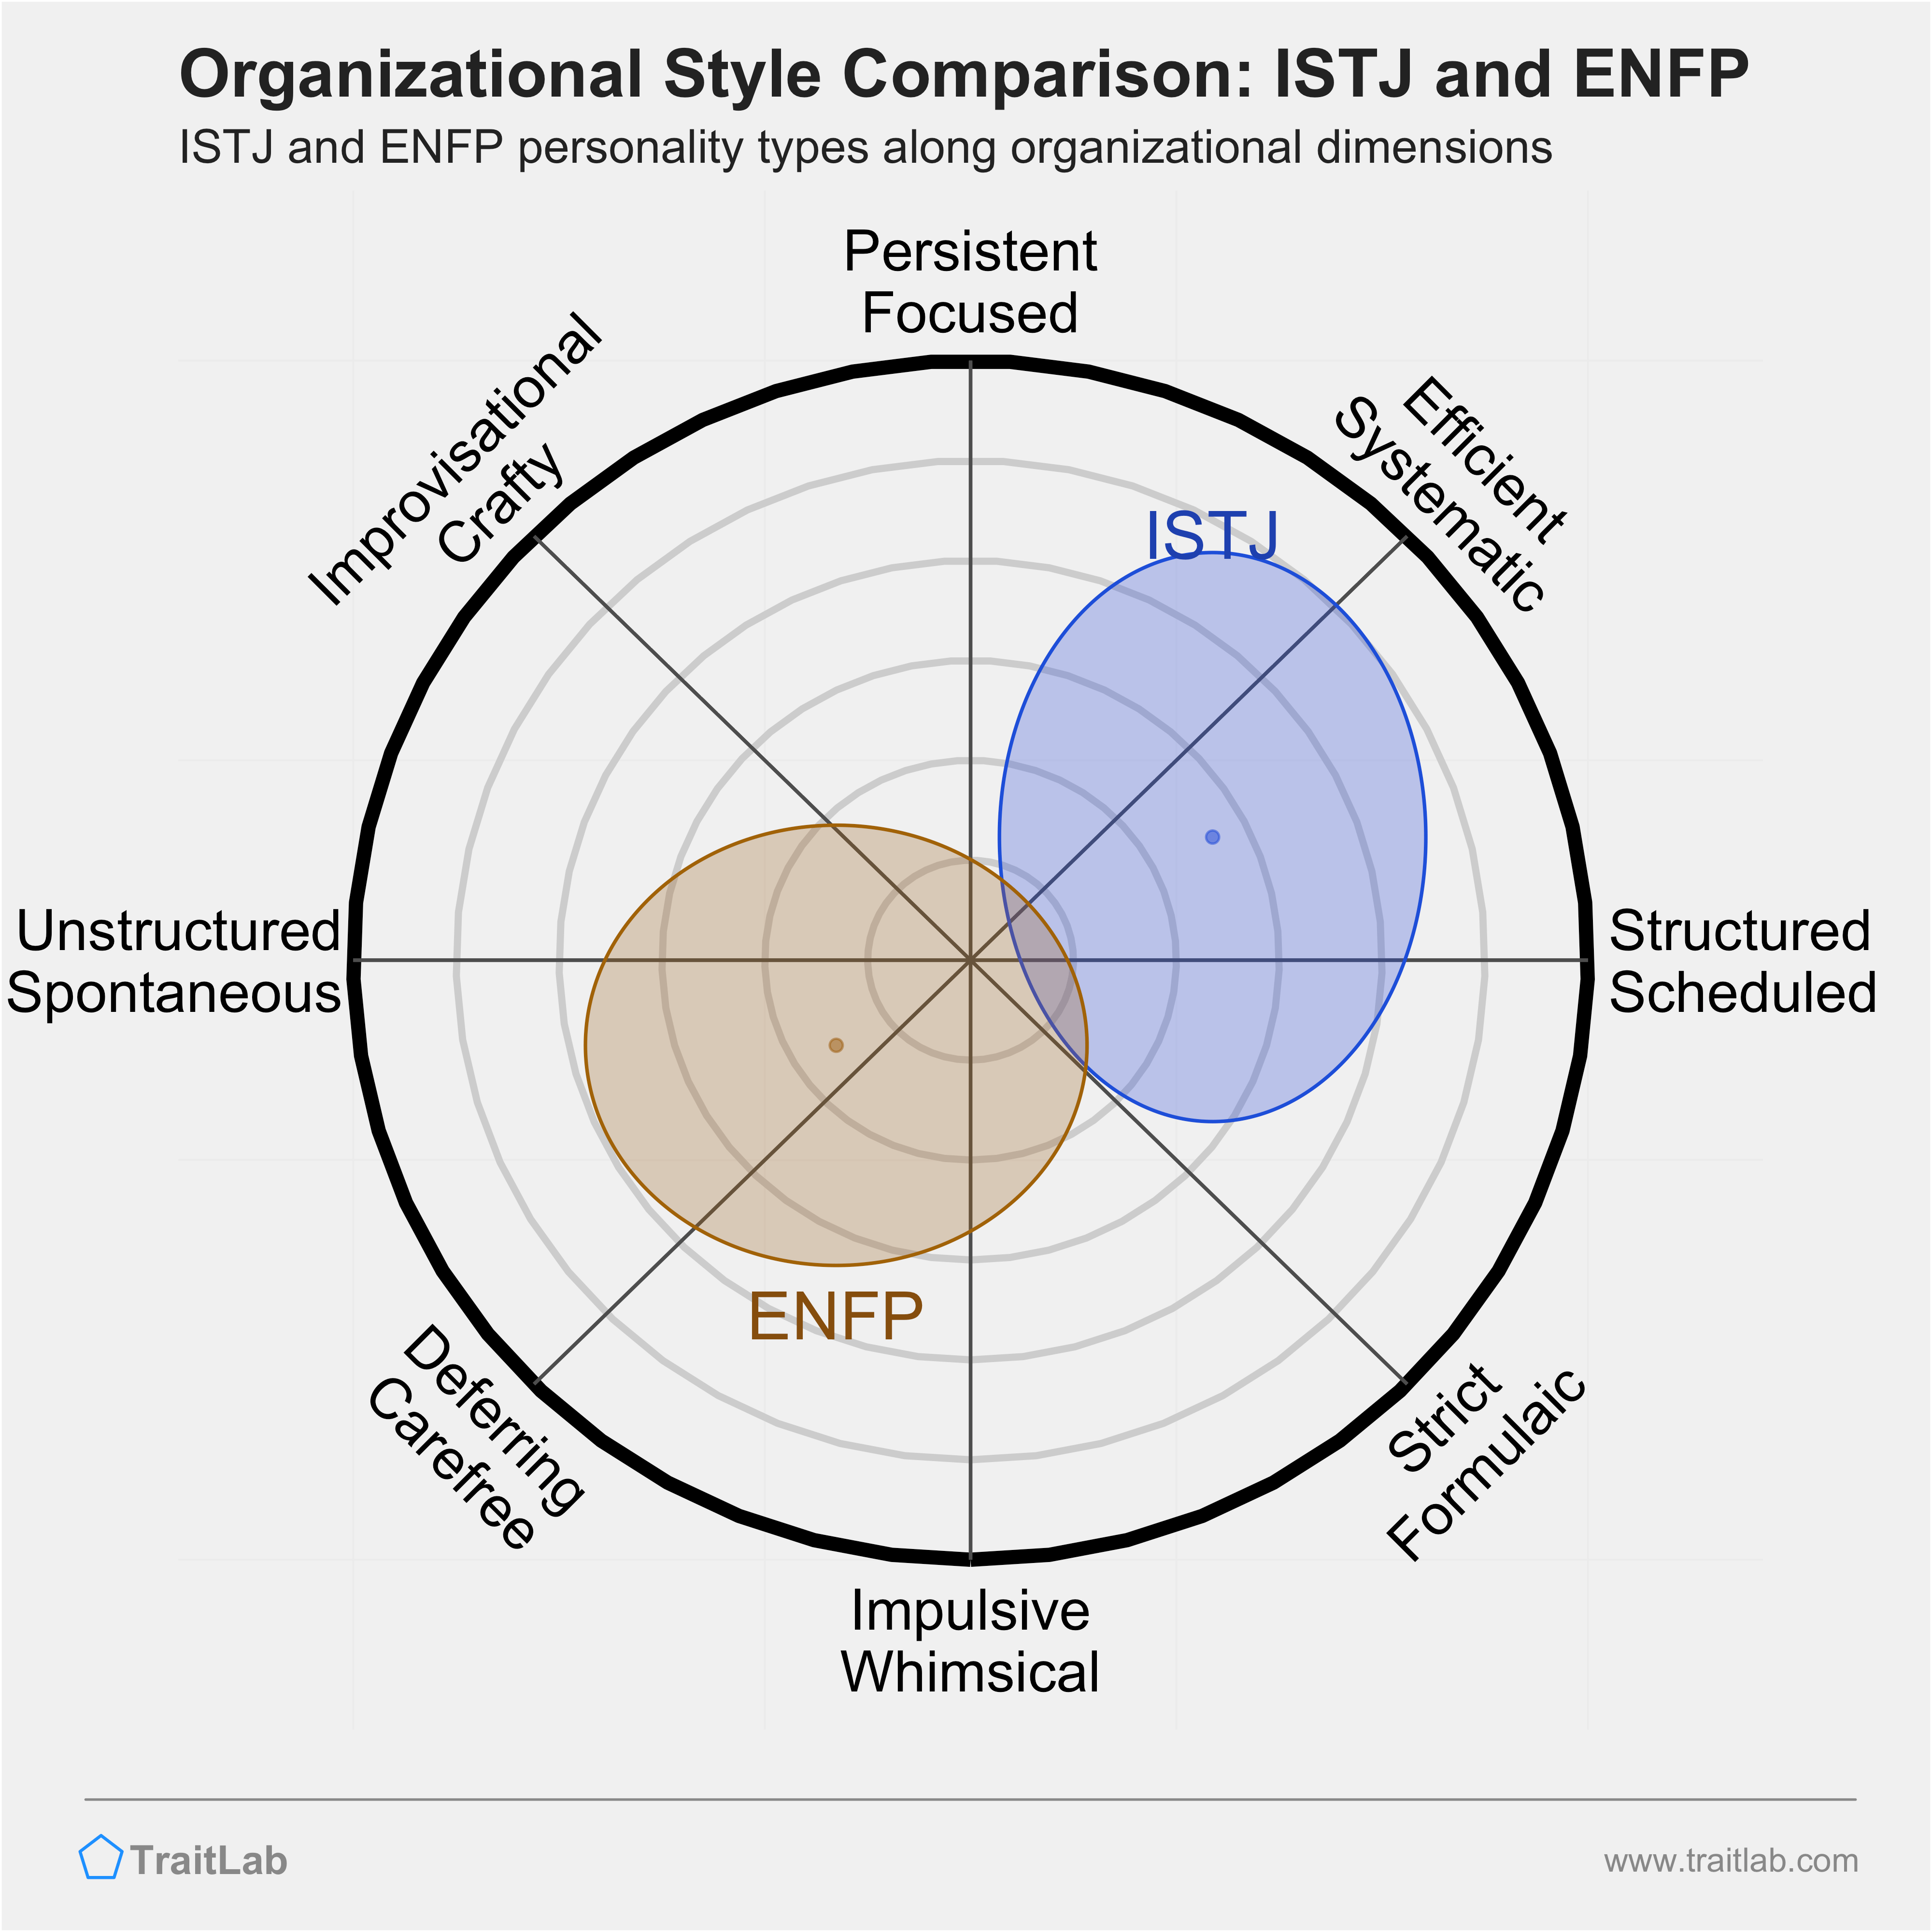 ISTJ and ENFP comparison across organizational dimensions